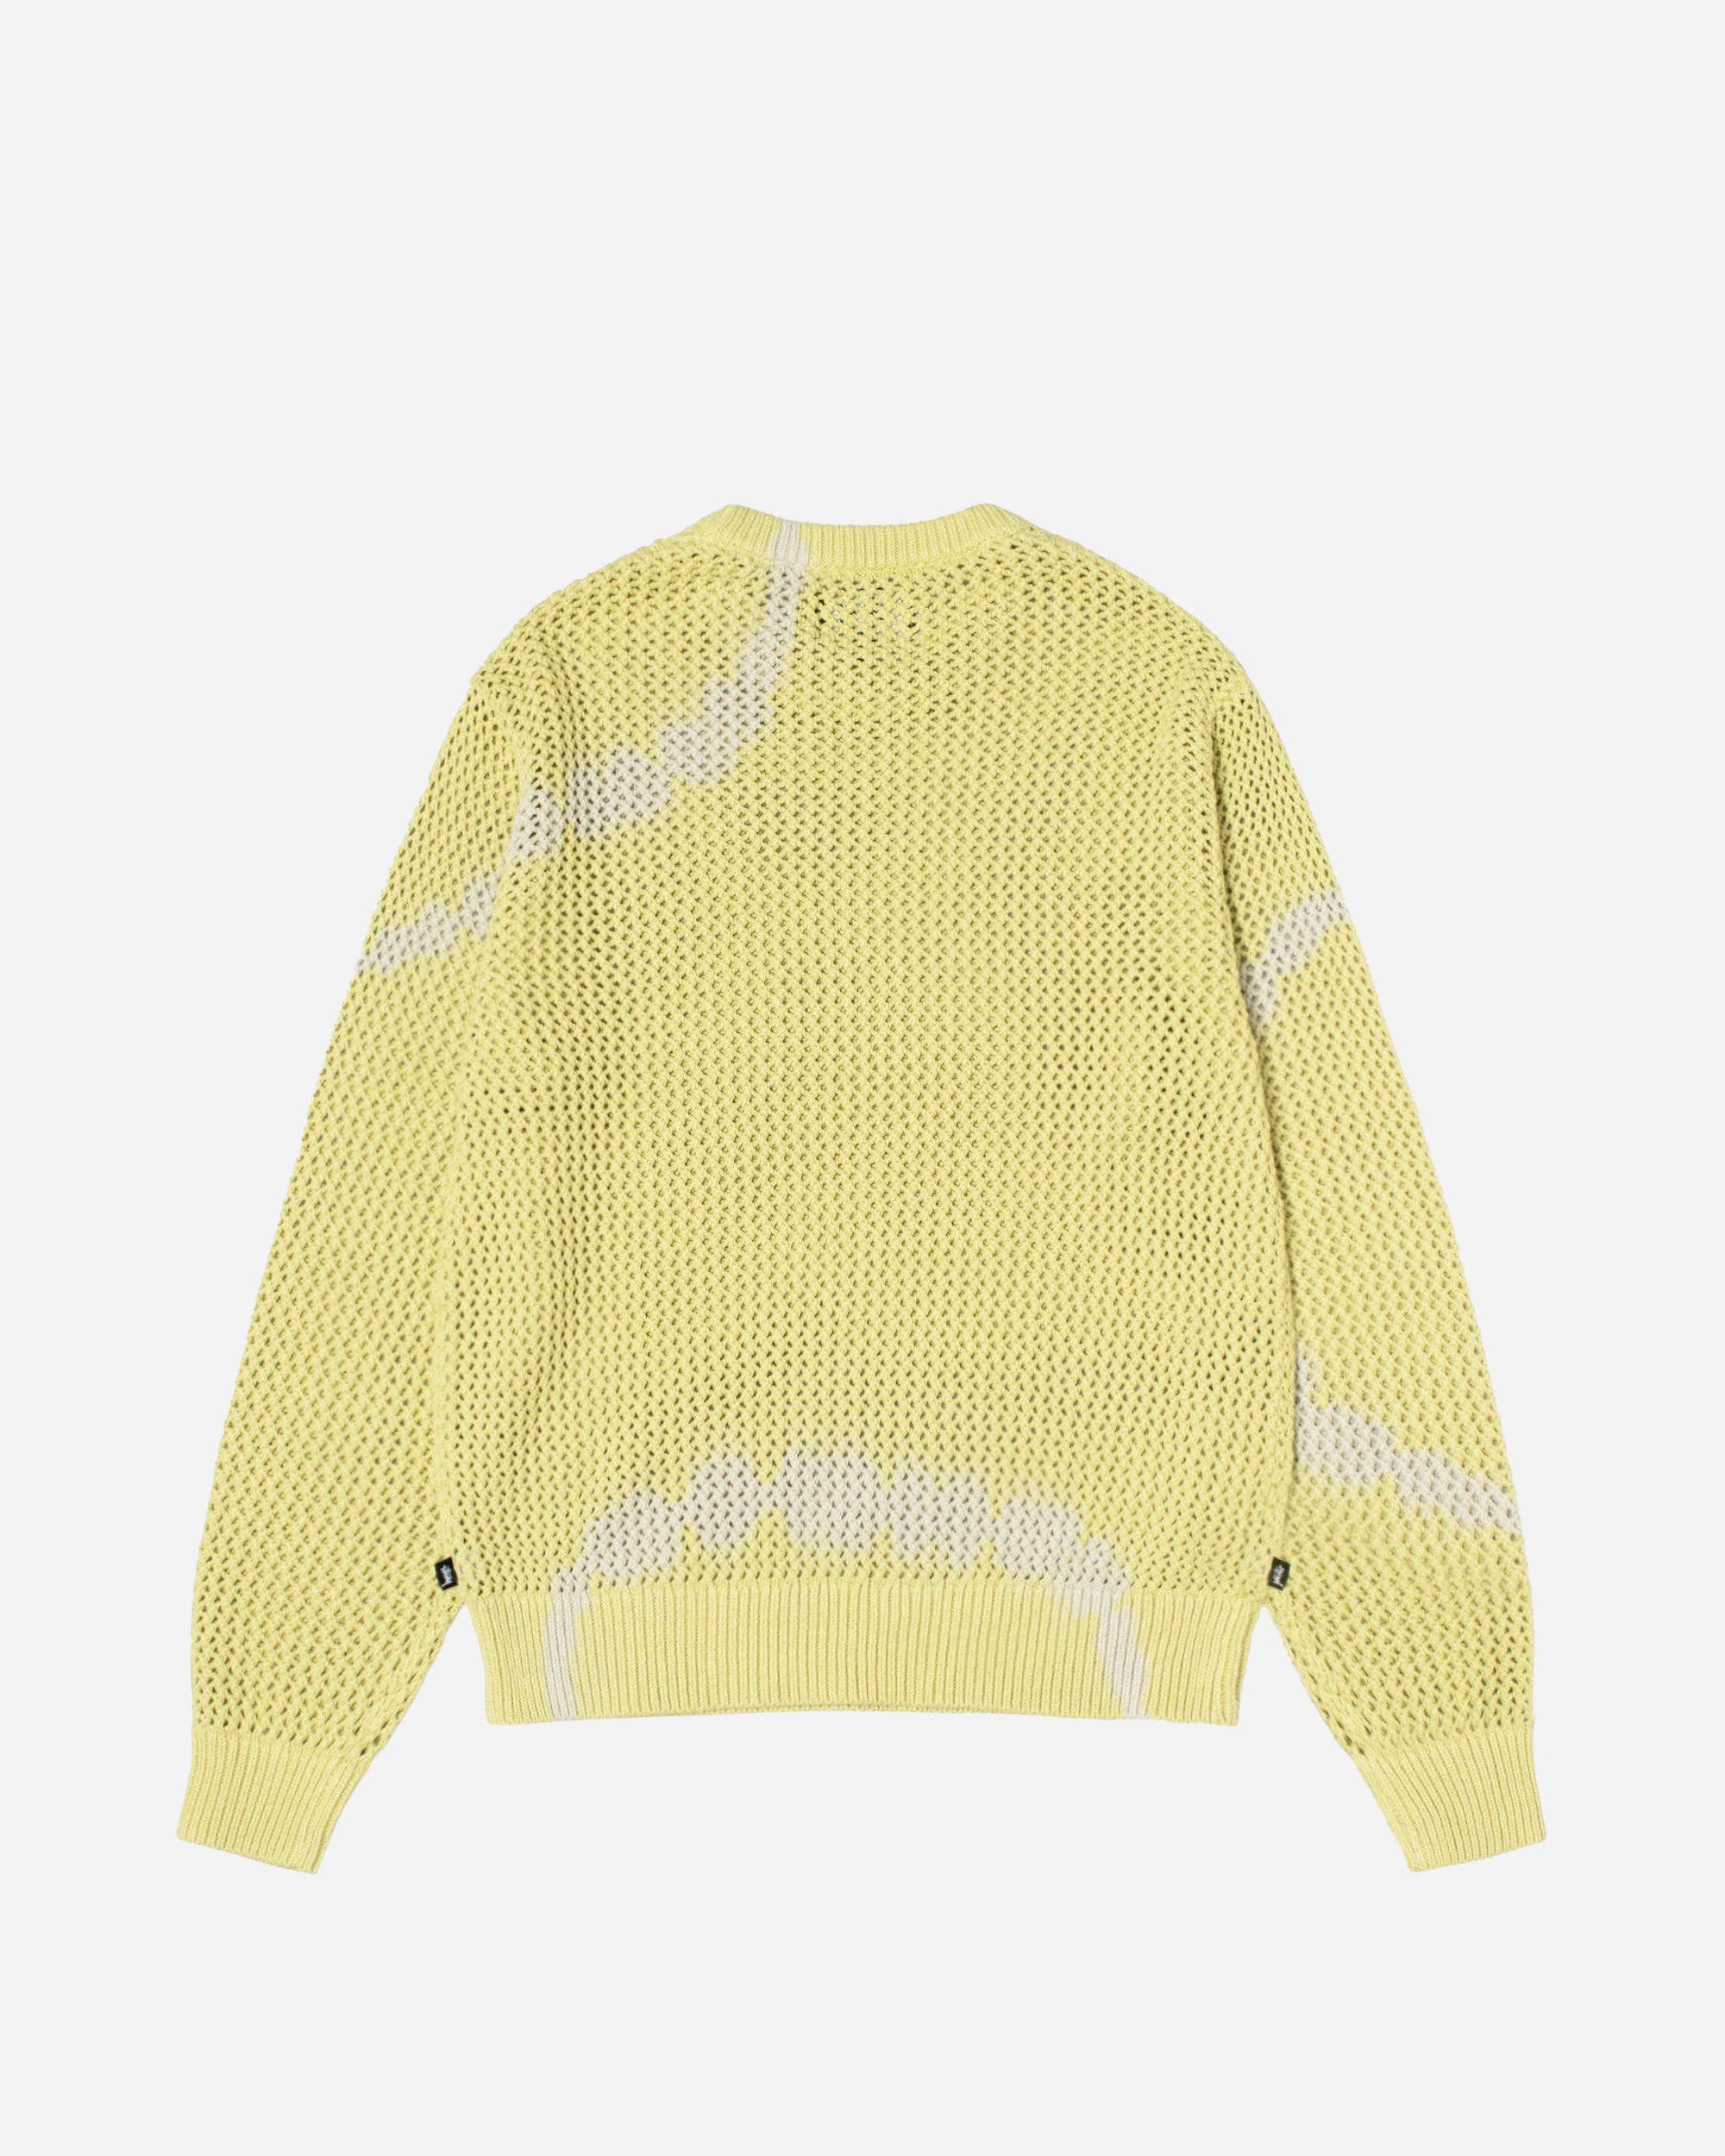 Pigment Dyed Loose Gauge Sweater